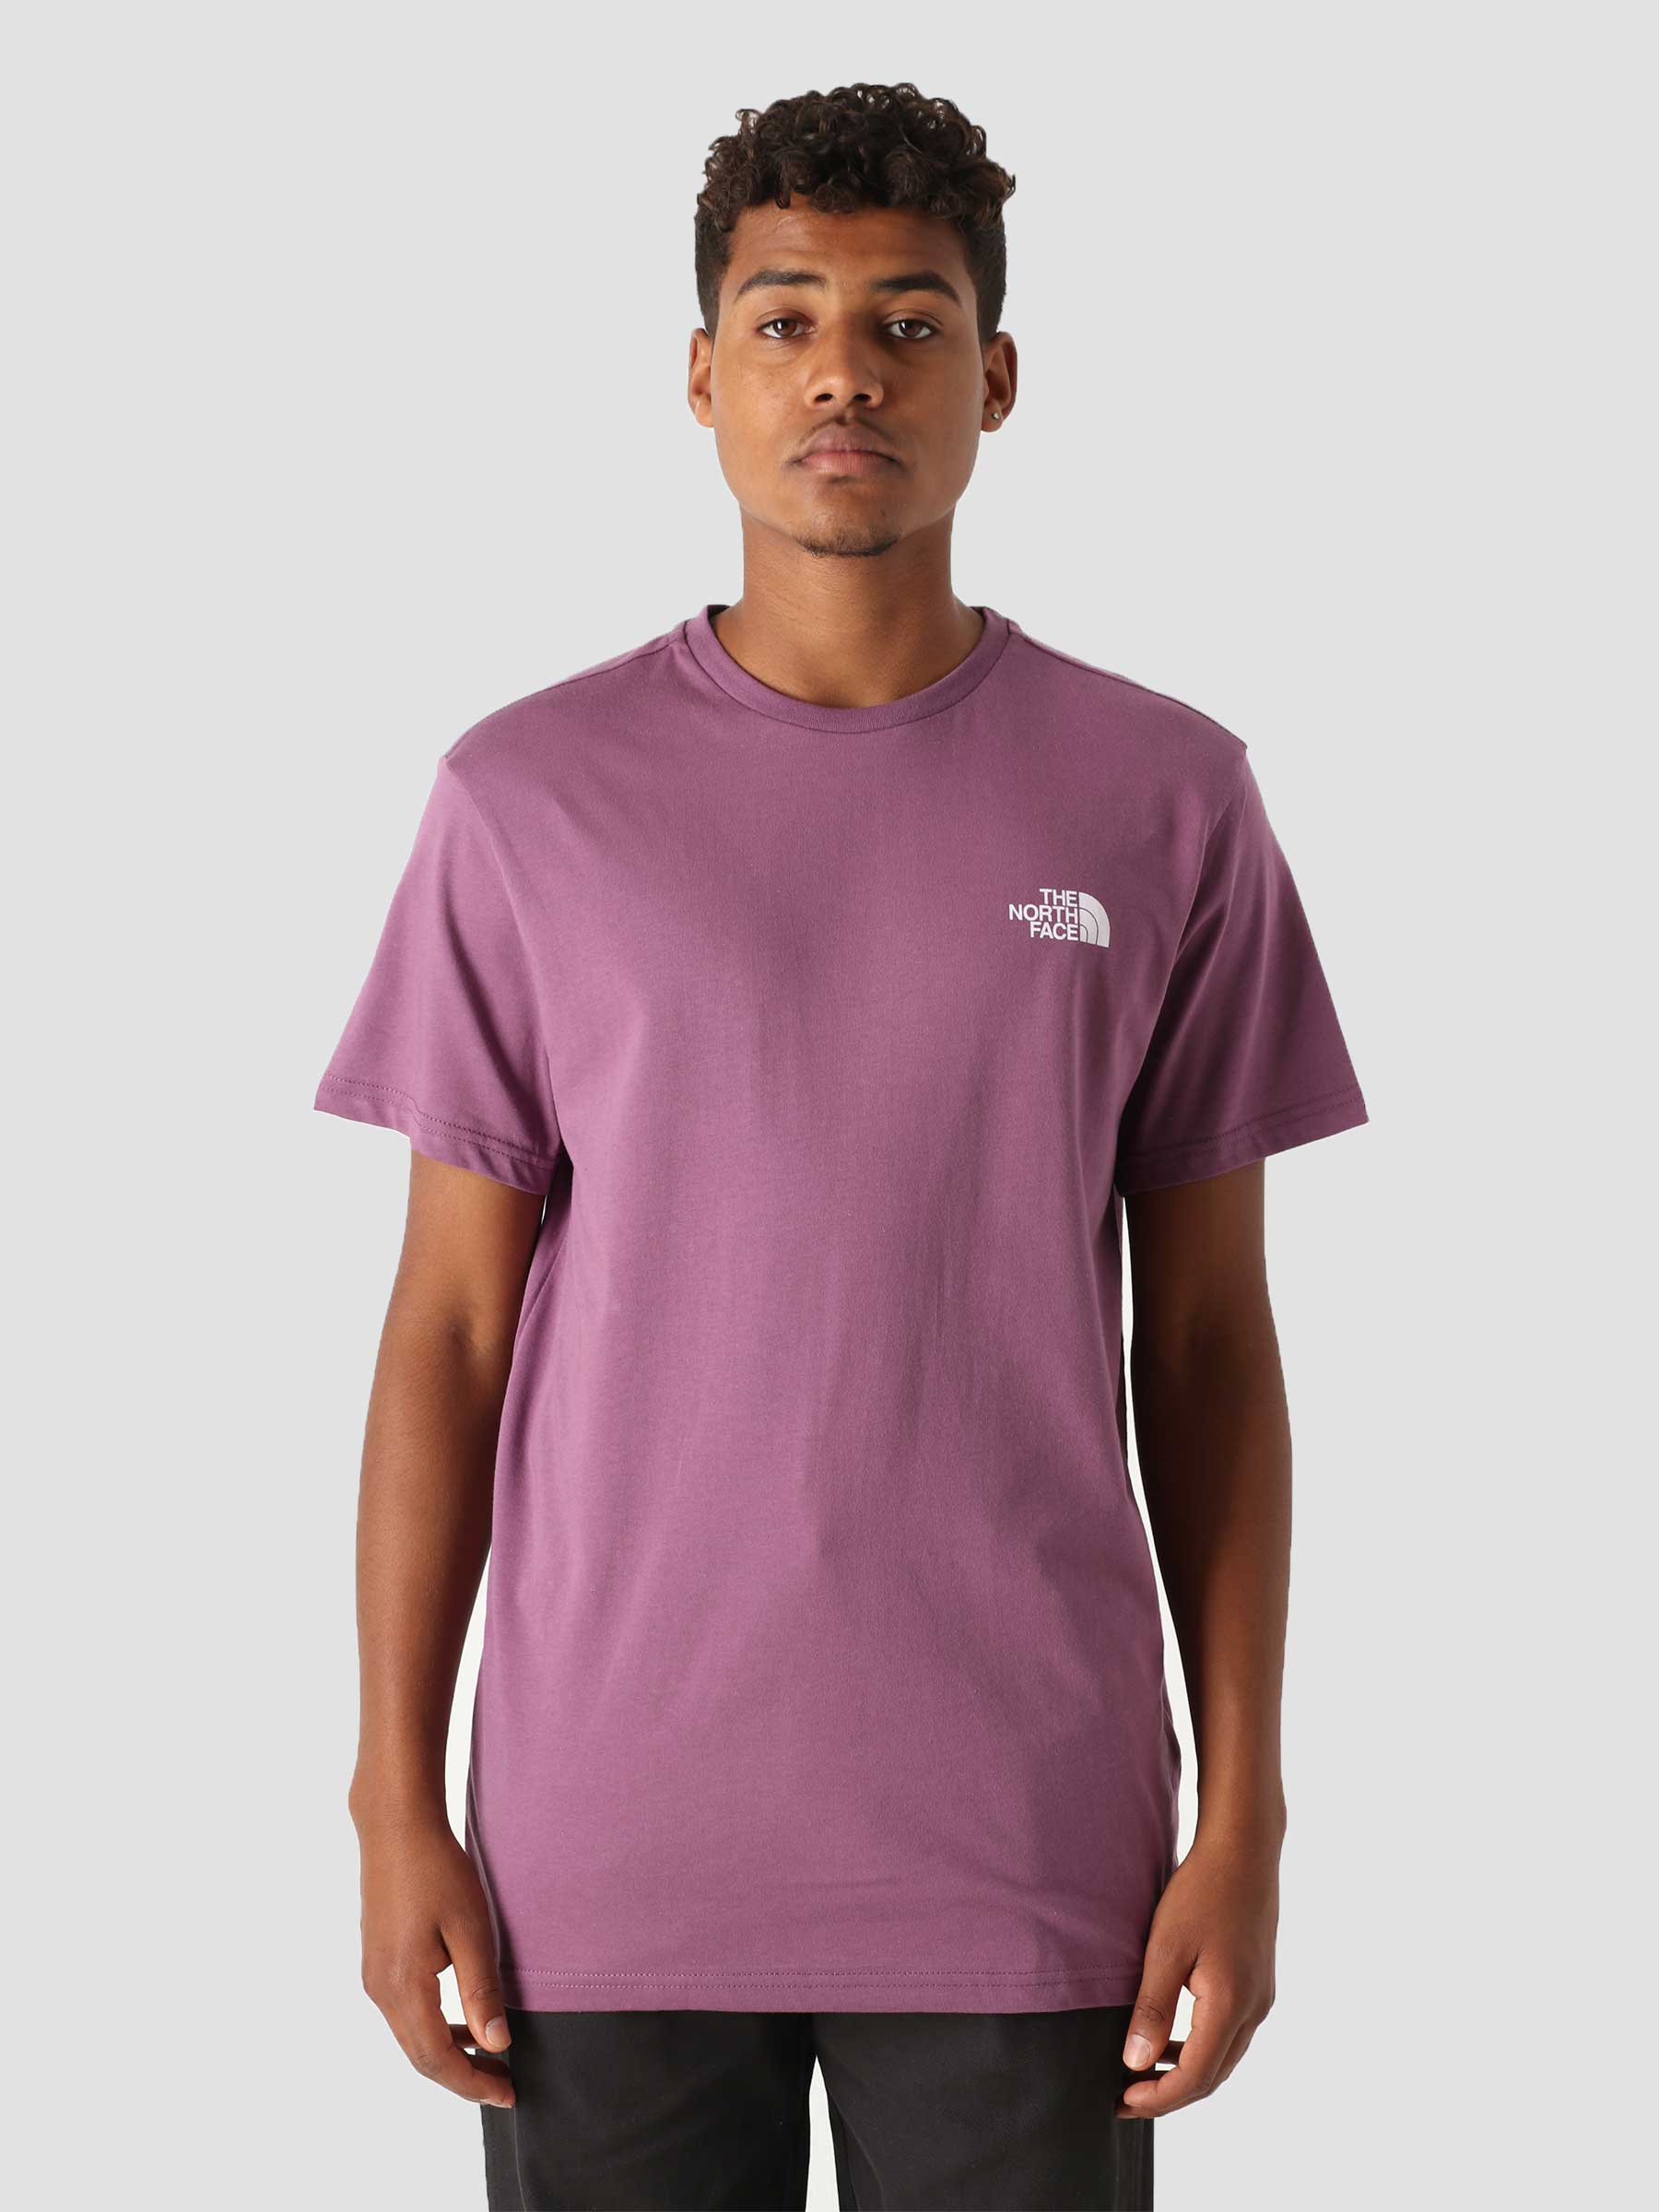 The North Face Simple Dome T-Shirt Pikes Purple - Freshcotton